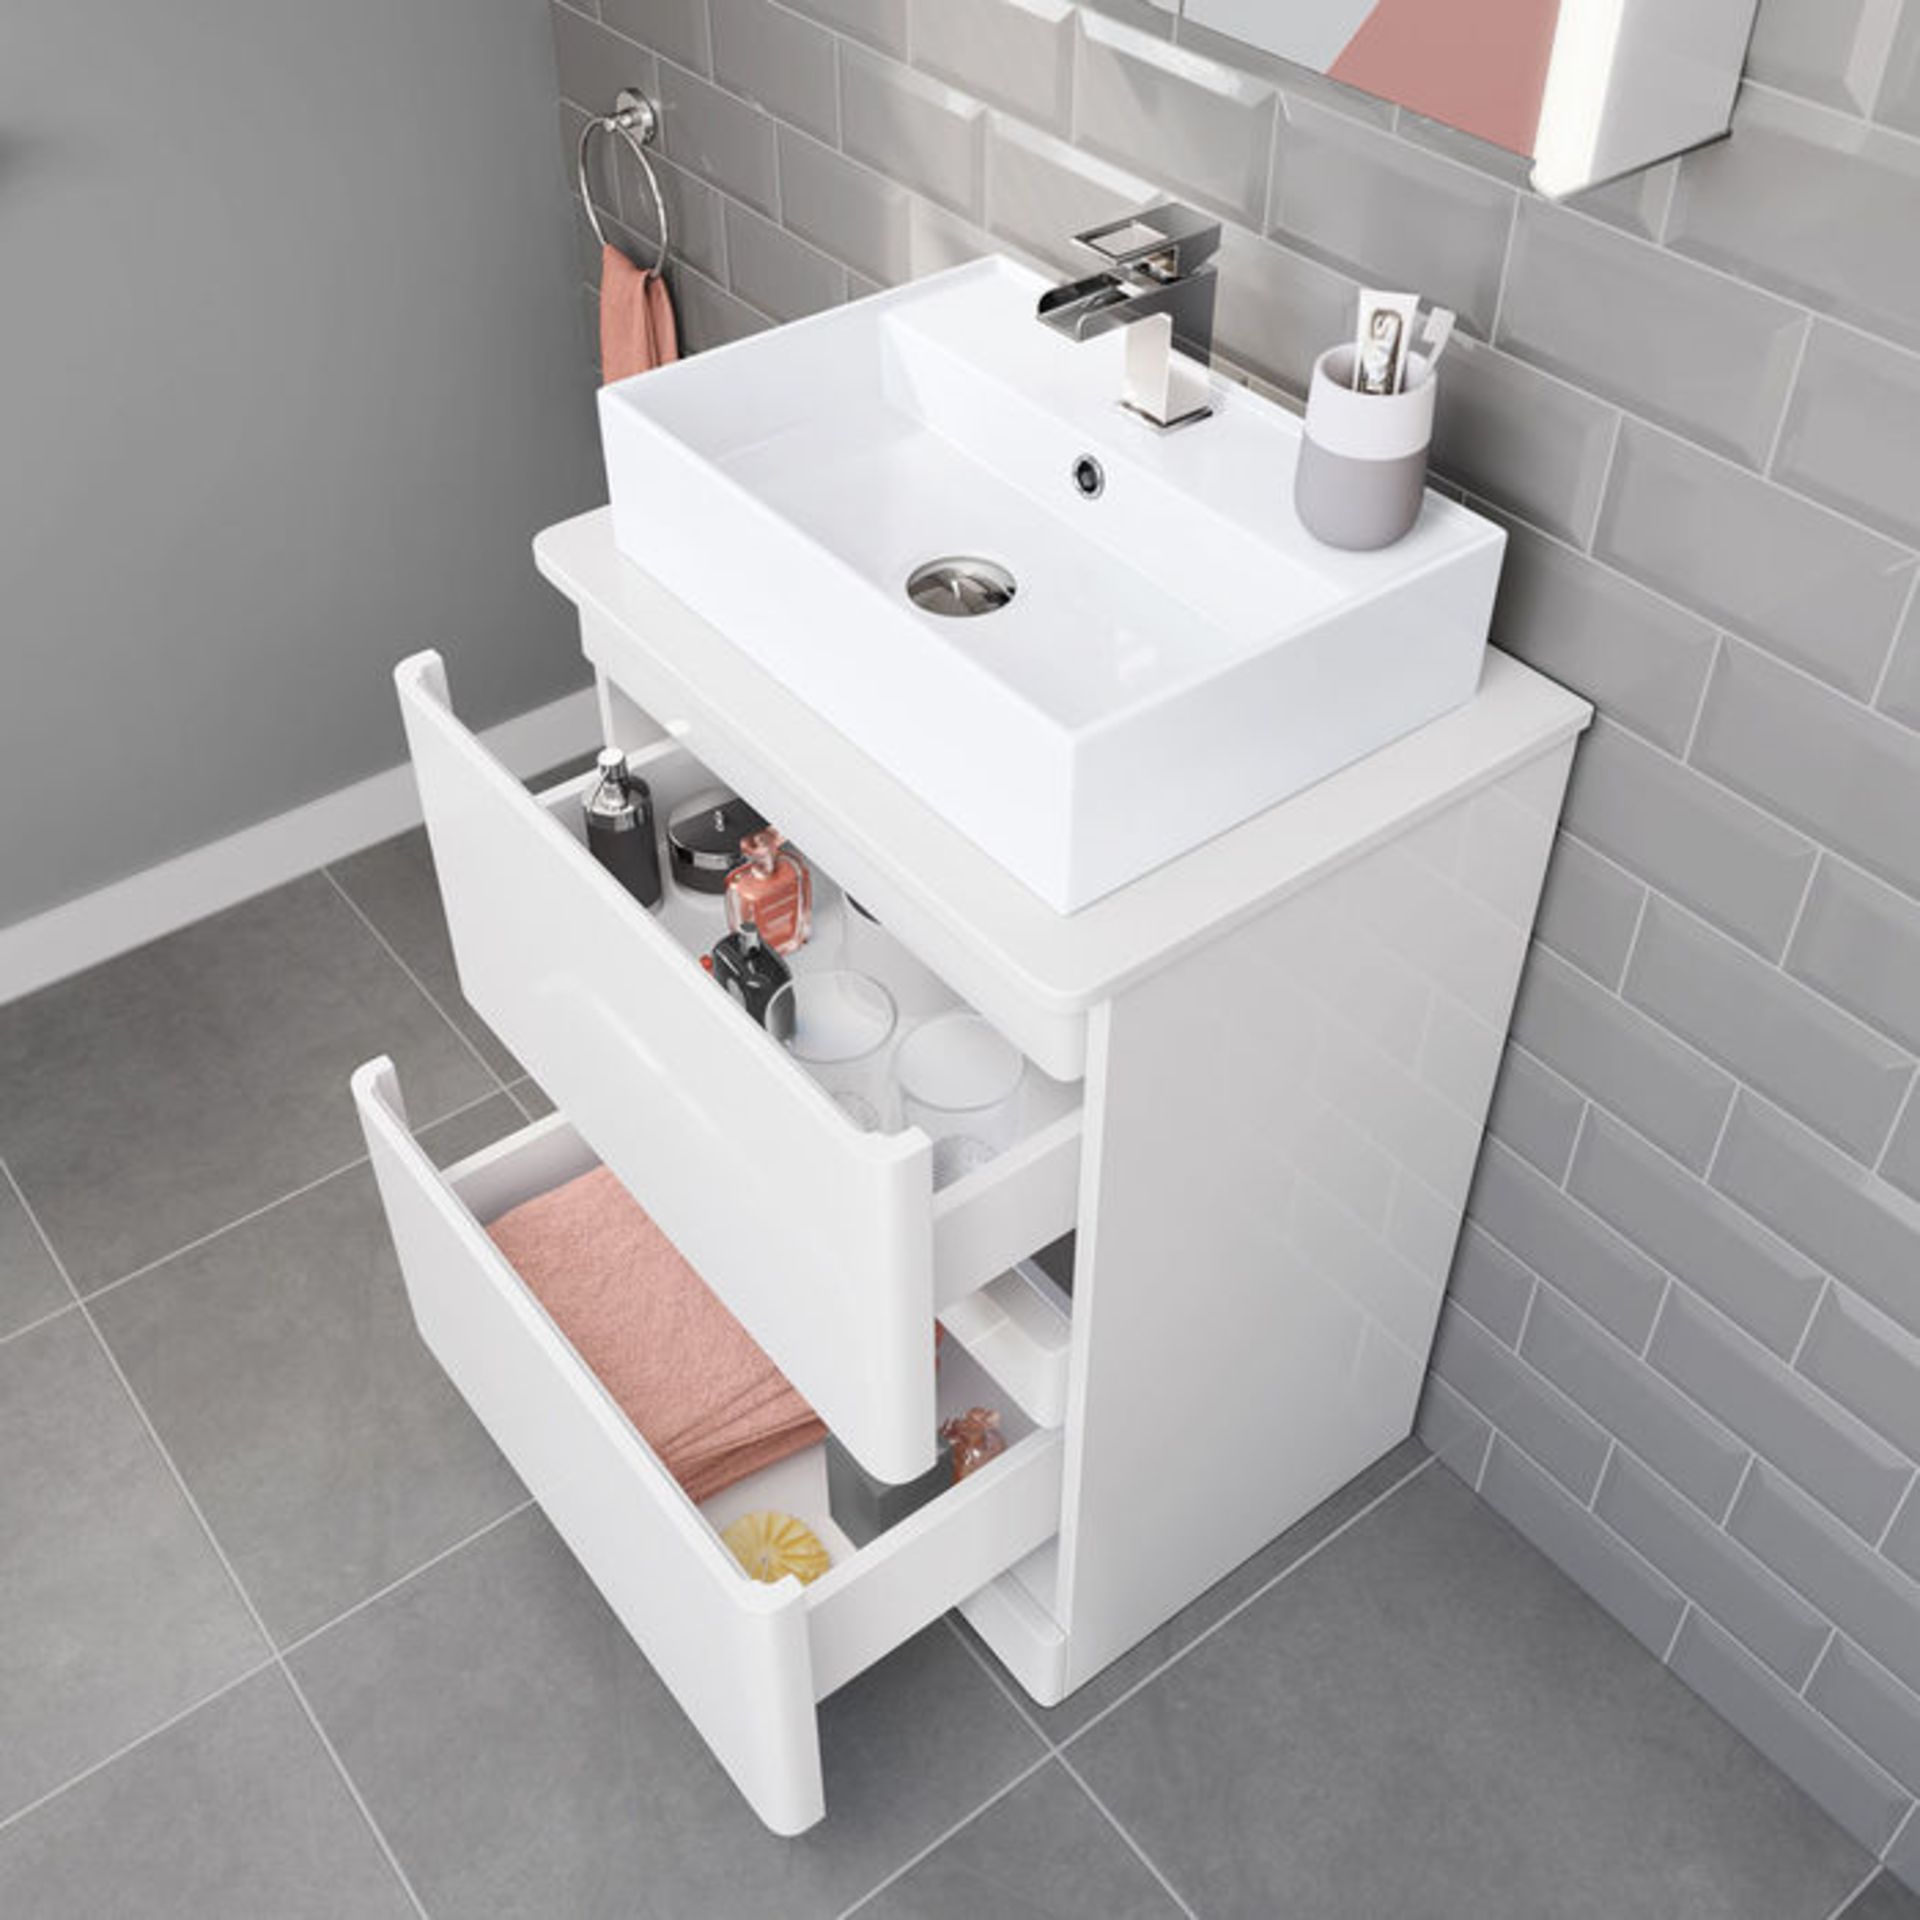 (AD50) 600mm Denver Gloss White Countertop Unit and Elisa Basin - Floor Standing. RRP £499.99. Comes - Image 3 of 11